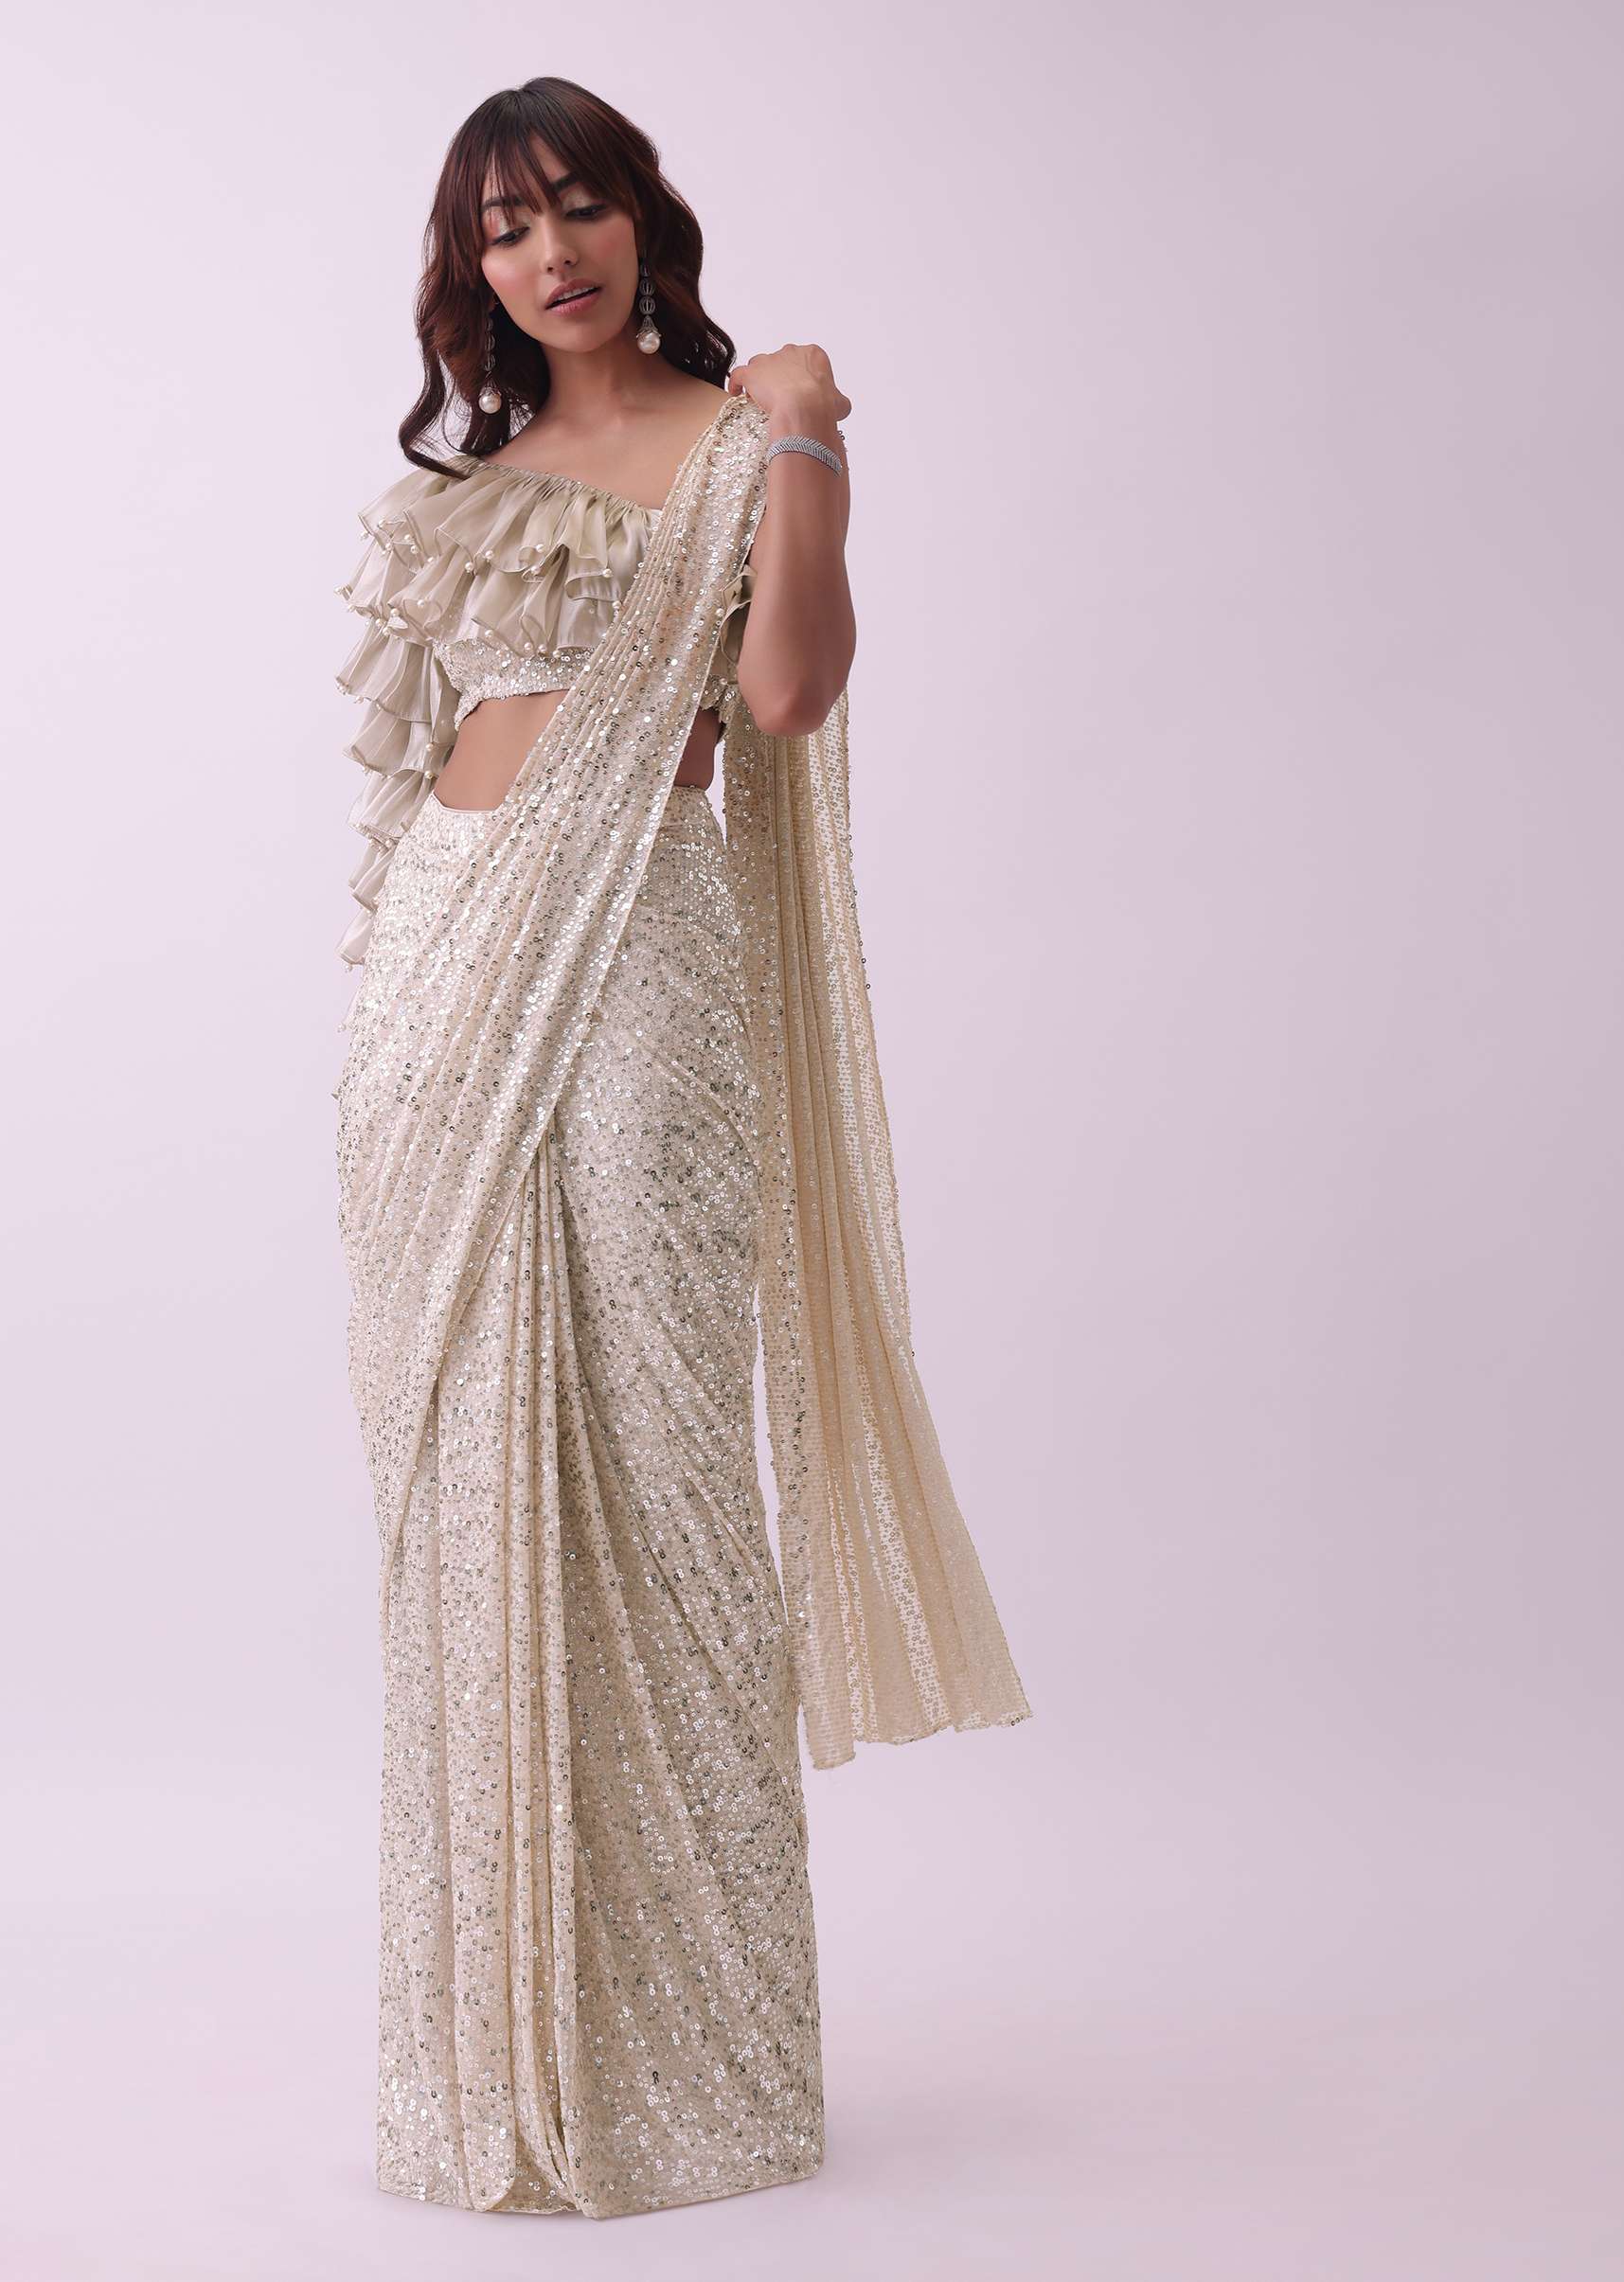 Off-White Pre Stitched Sequins Saree And Blouse With Pearl Finish